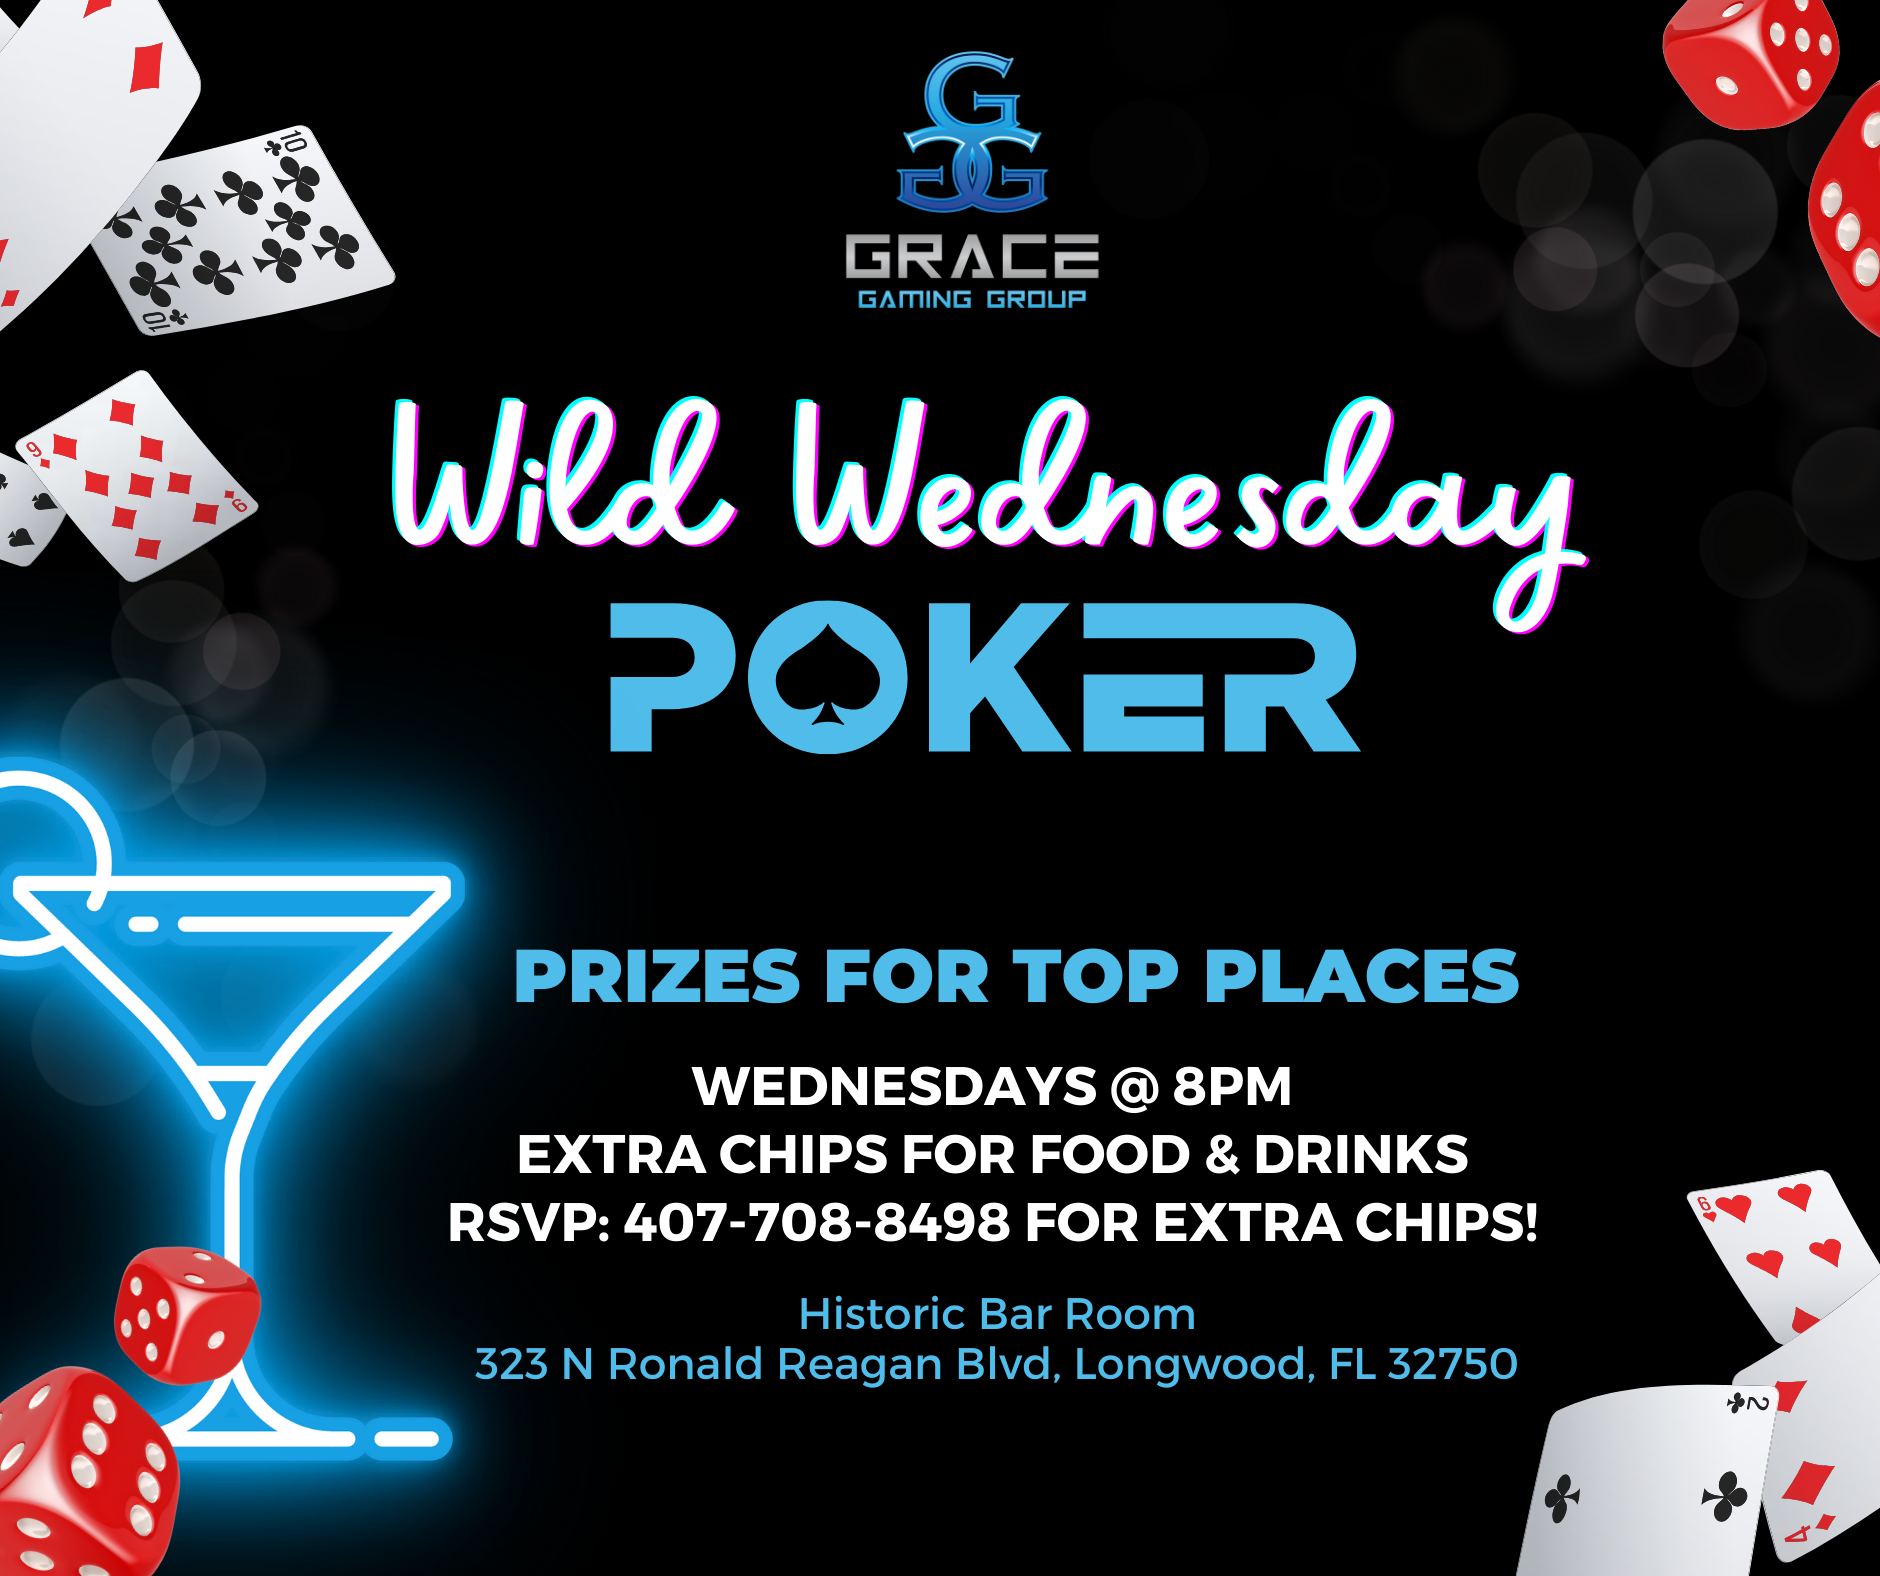 A poster for a wild wednesday poker event.